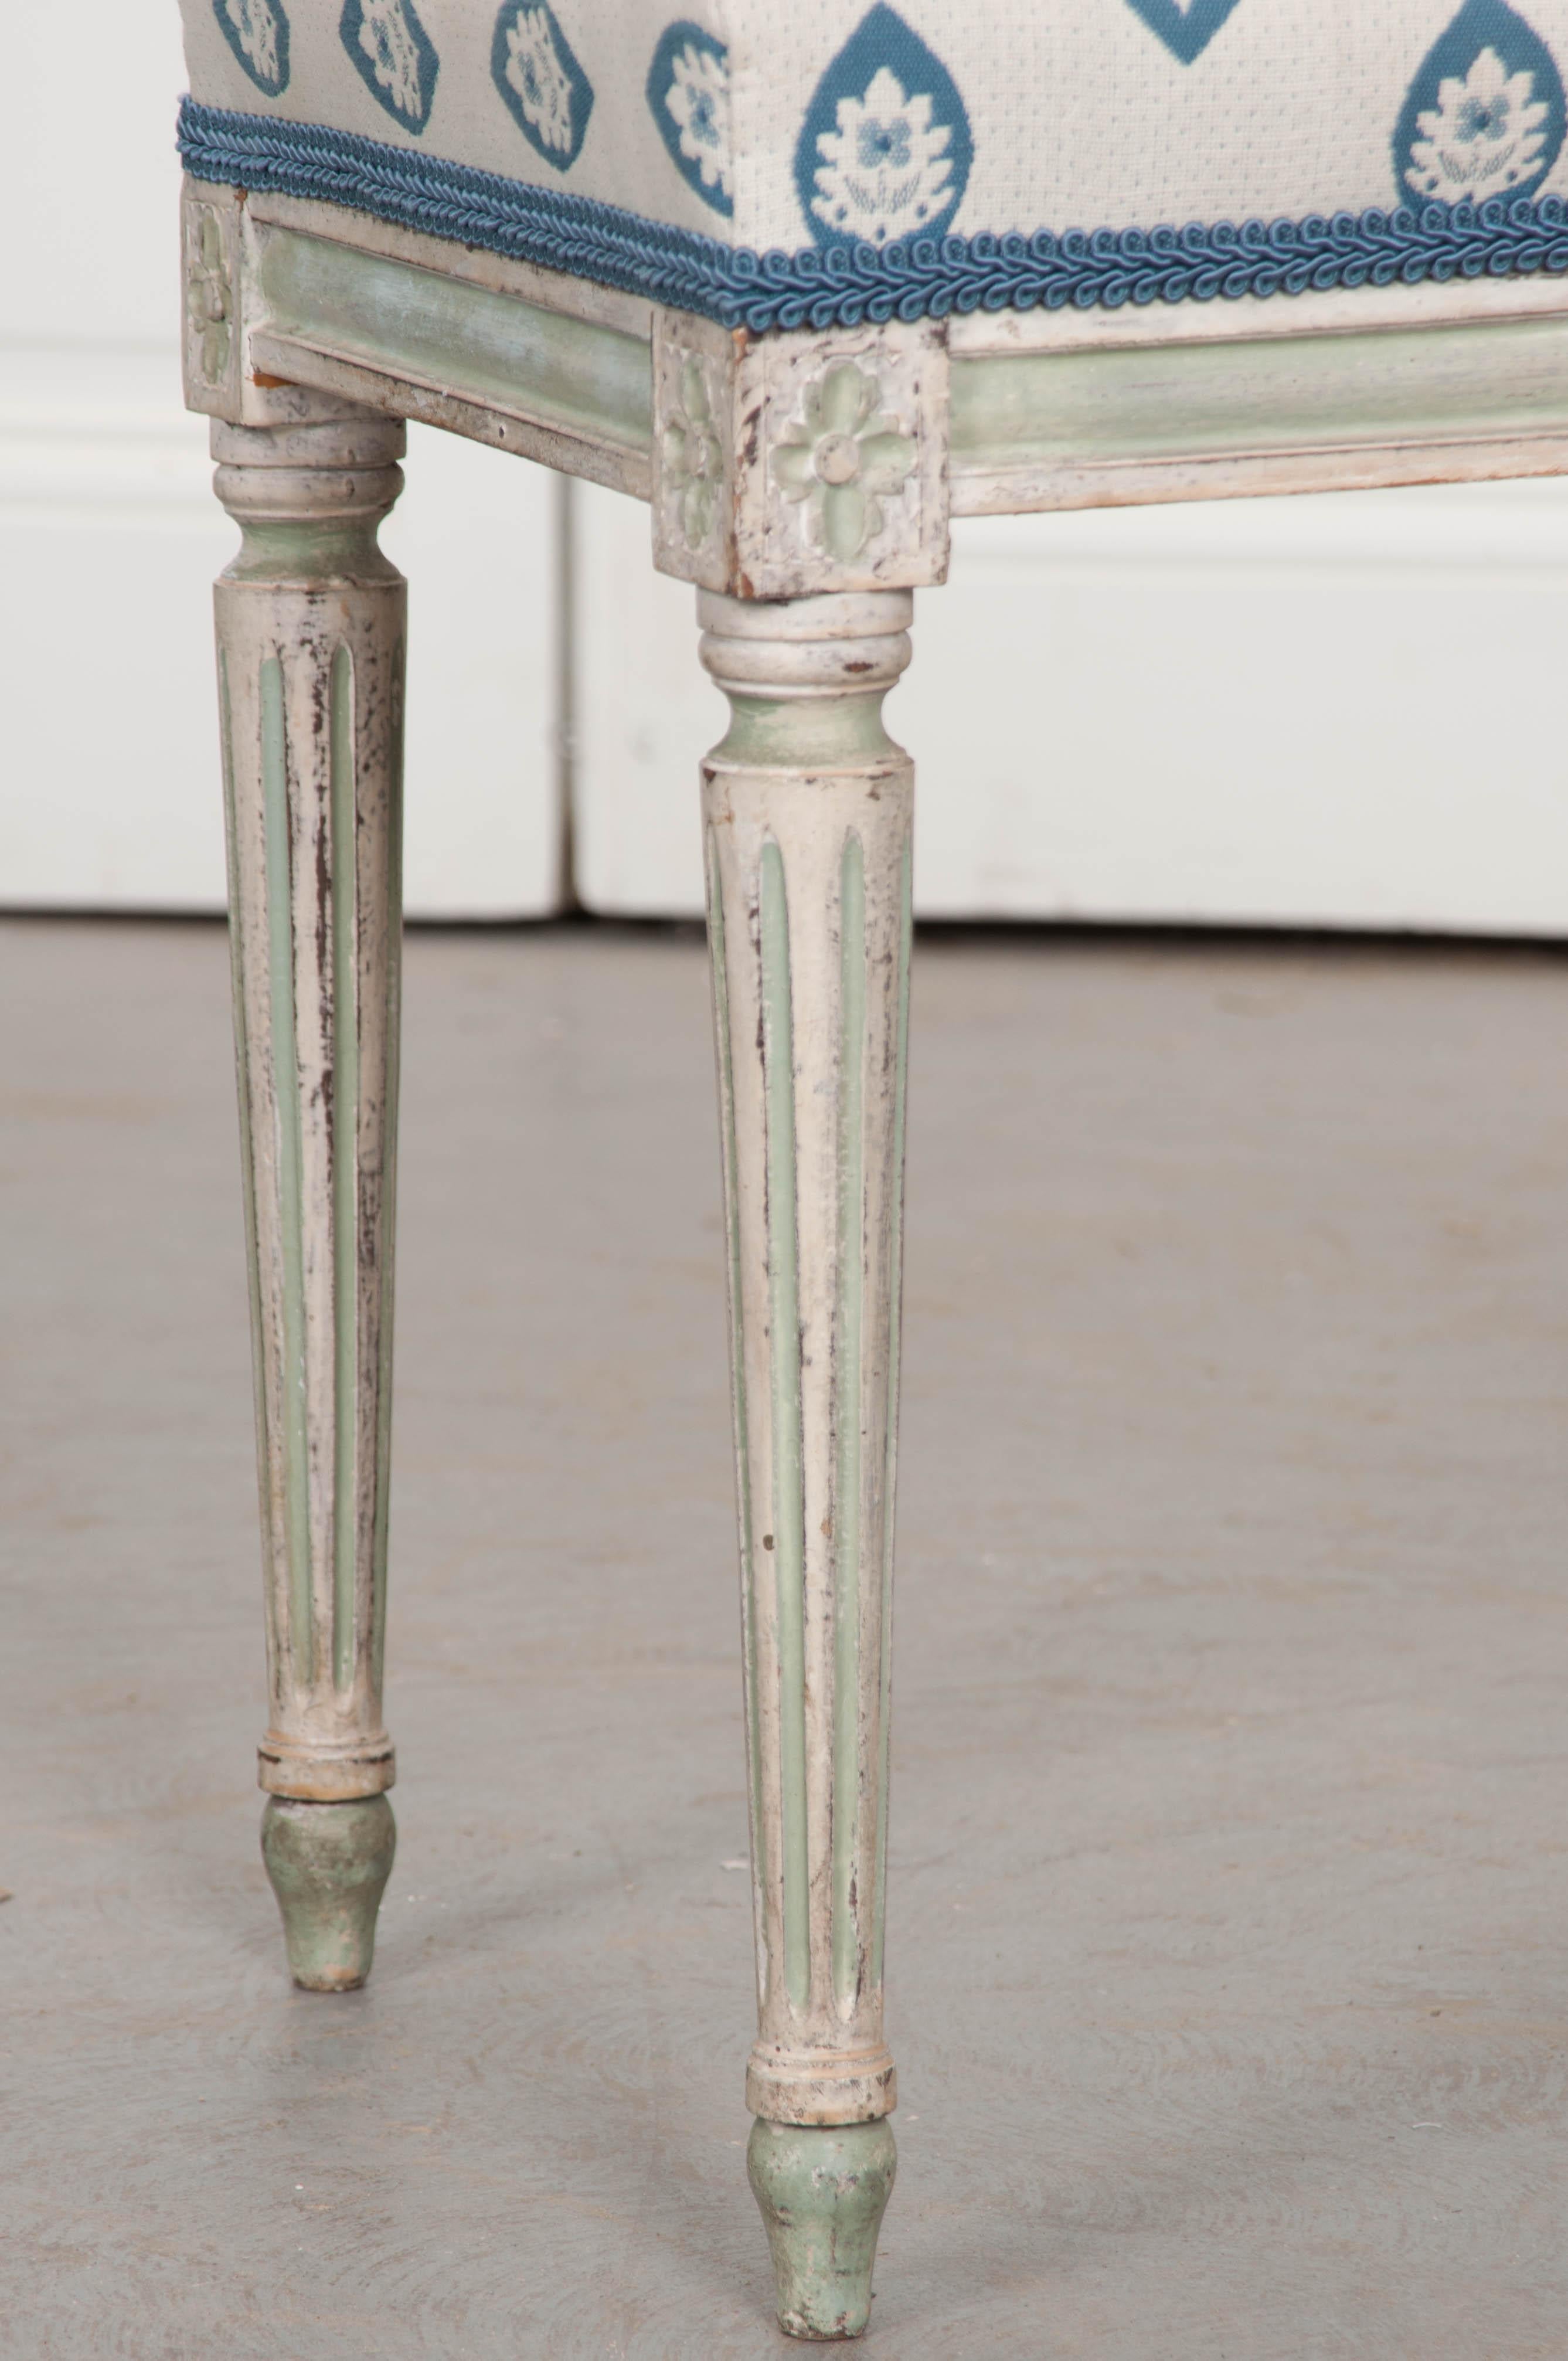 A darling painted Louis XVI style stool from the latter part of the 19th century. The stool is painted a lovely cream color with serene, powder blue-painted accents. The frame is quintessentially Louis XVI, with rosette-carved joinery dies and